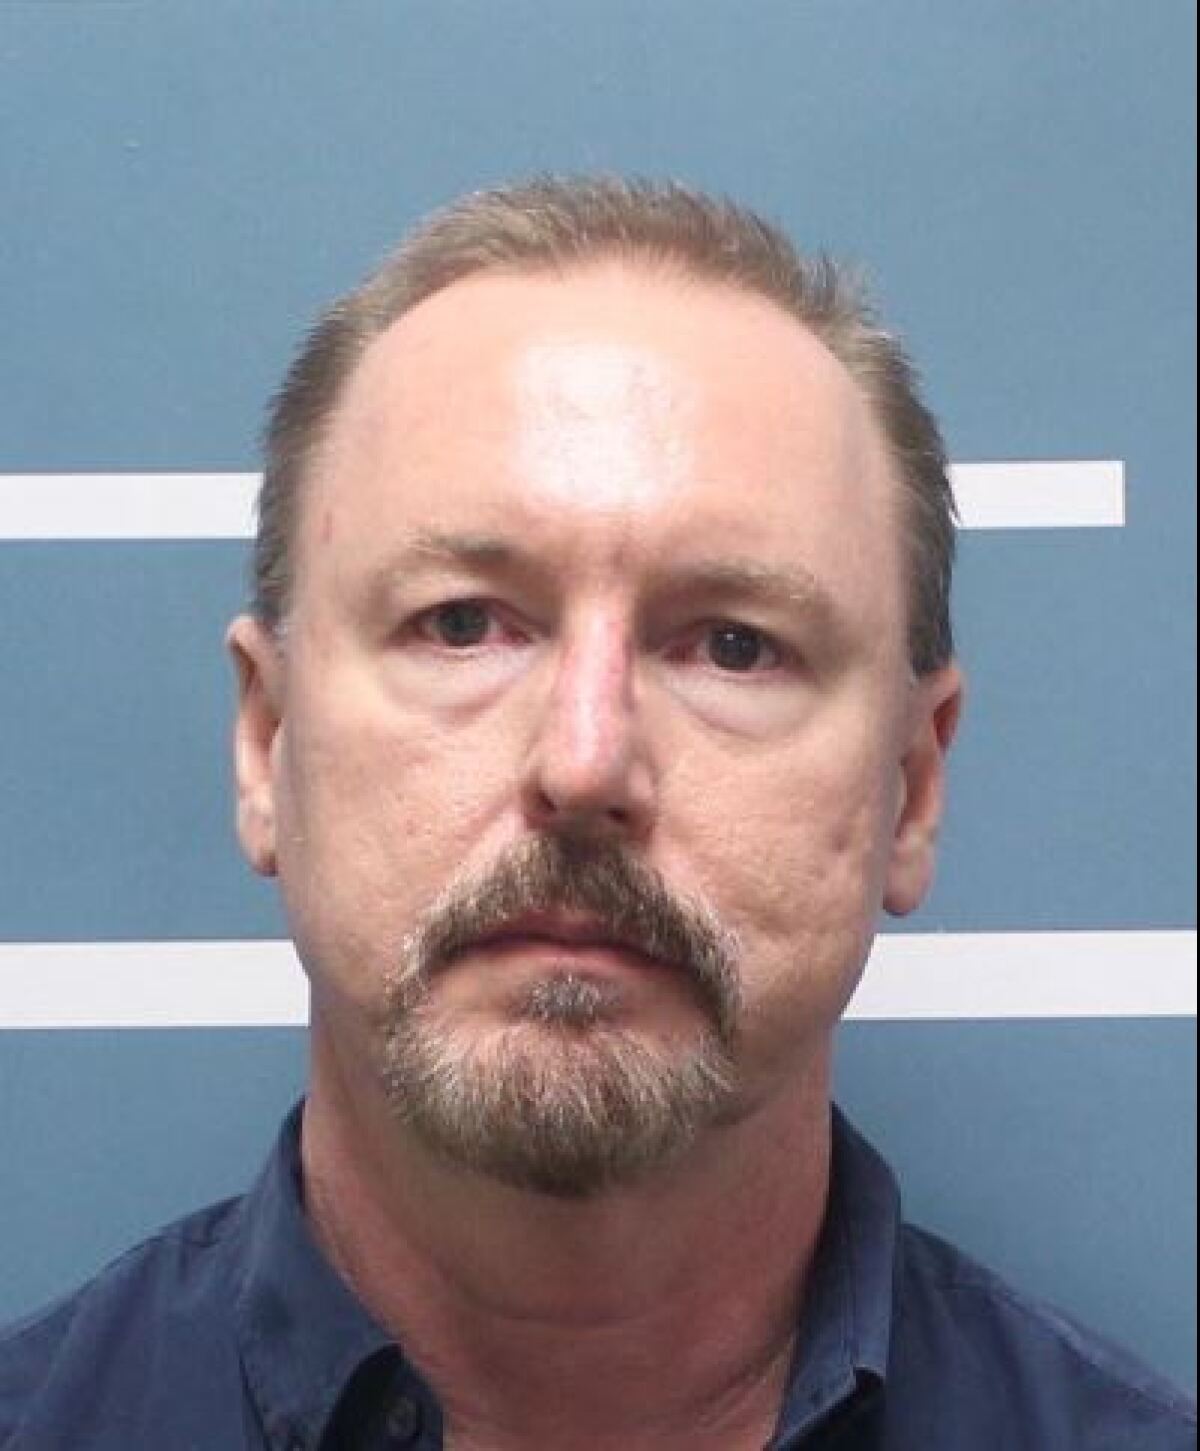 Nickey Duane Stane, 52, was arrested on suspicion of four sexual assaults that occurred between 1999 and 2002. He is also the primary suspect in a cold-case homicide.